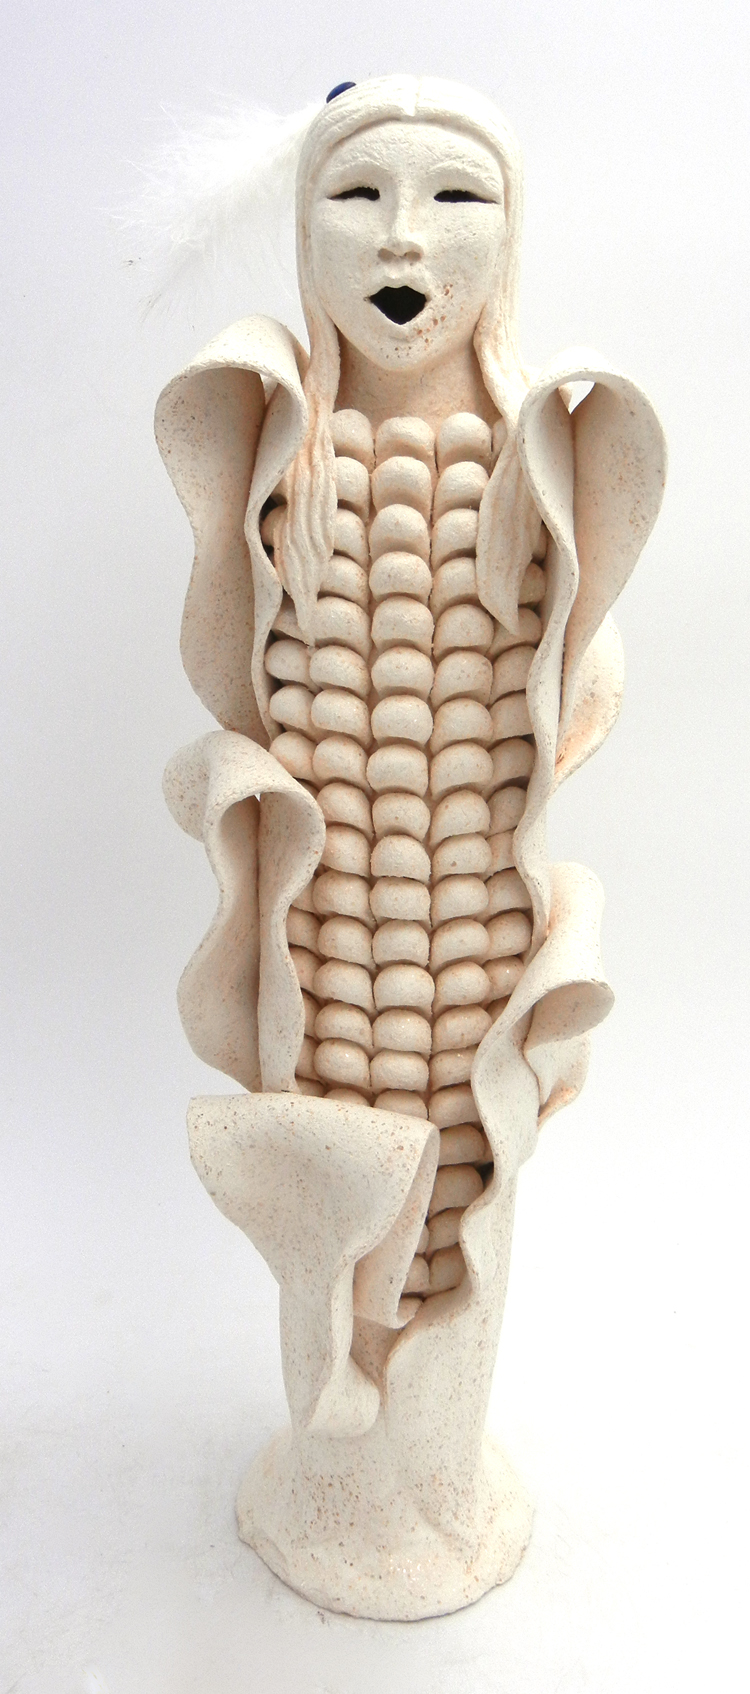 Navajo handmade white micaceous corn mother figurine by Nora Yazzie